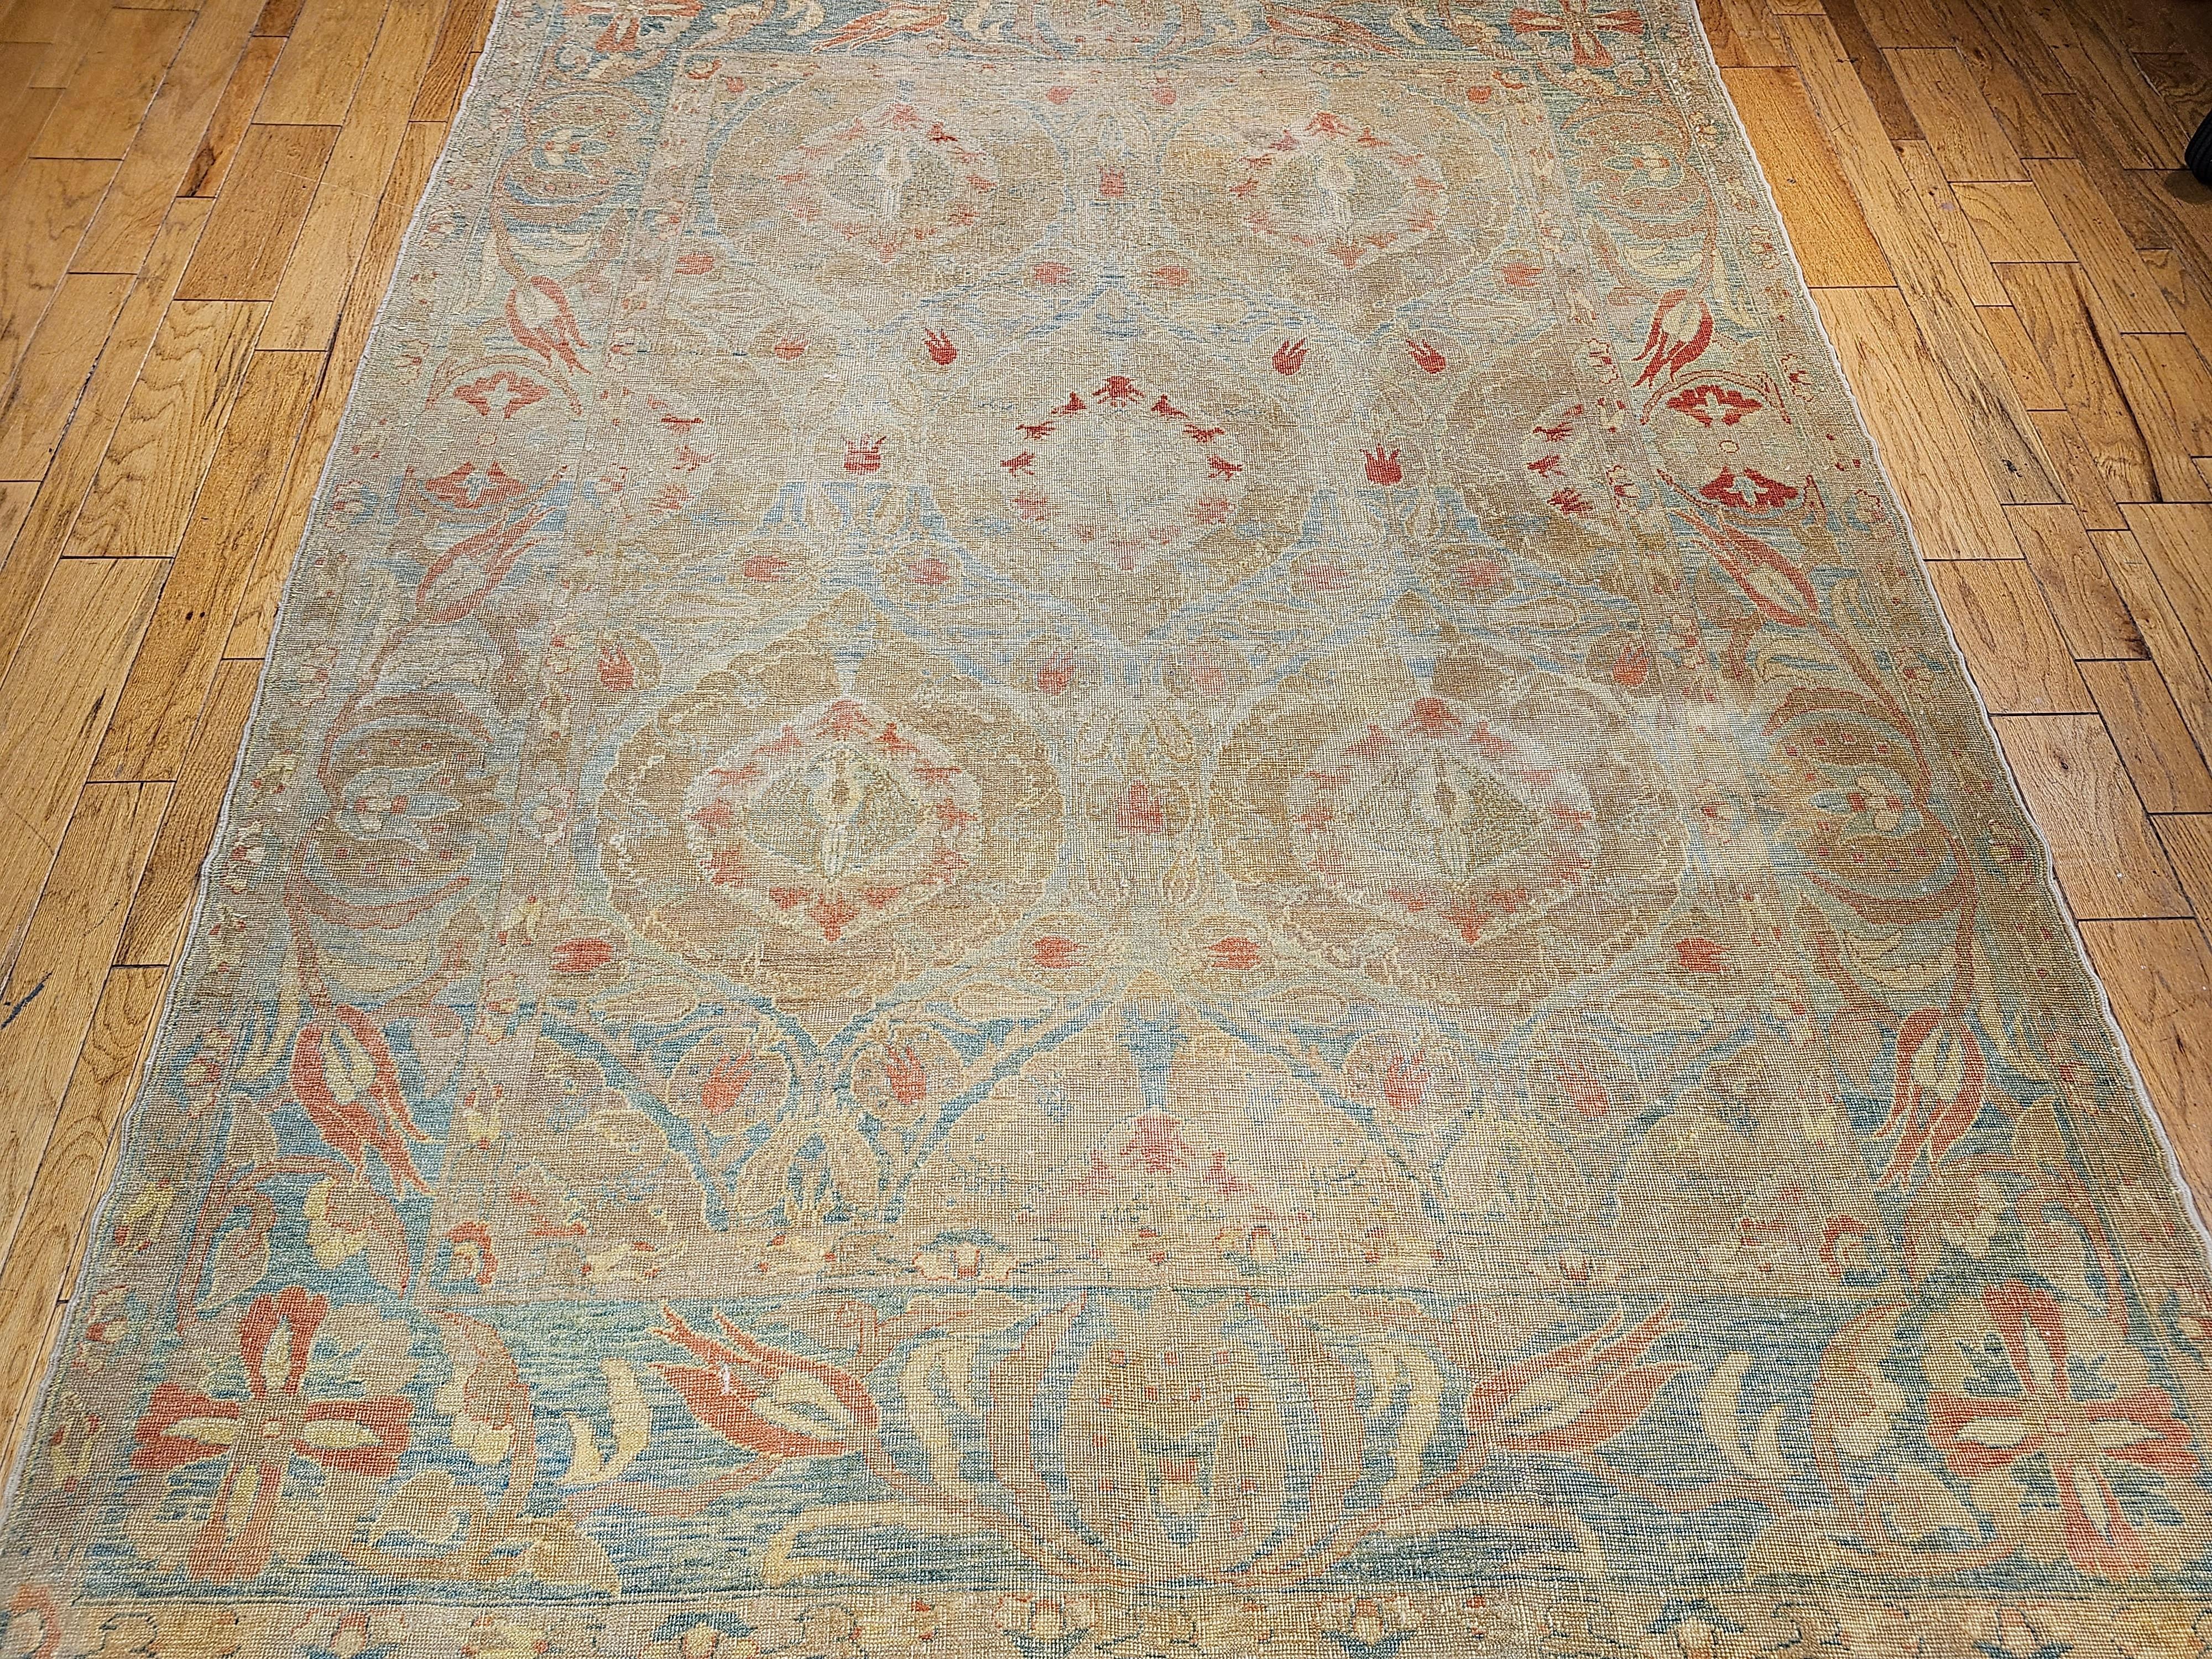 Vintage room size Turkish Oushak in an all over pattern from the early 1900s is in a very desirable “near square” size. The beautiful Oushak rug has a short pile and the large floral design format of branches and leaves are scattered throughout the